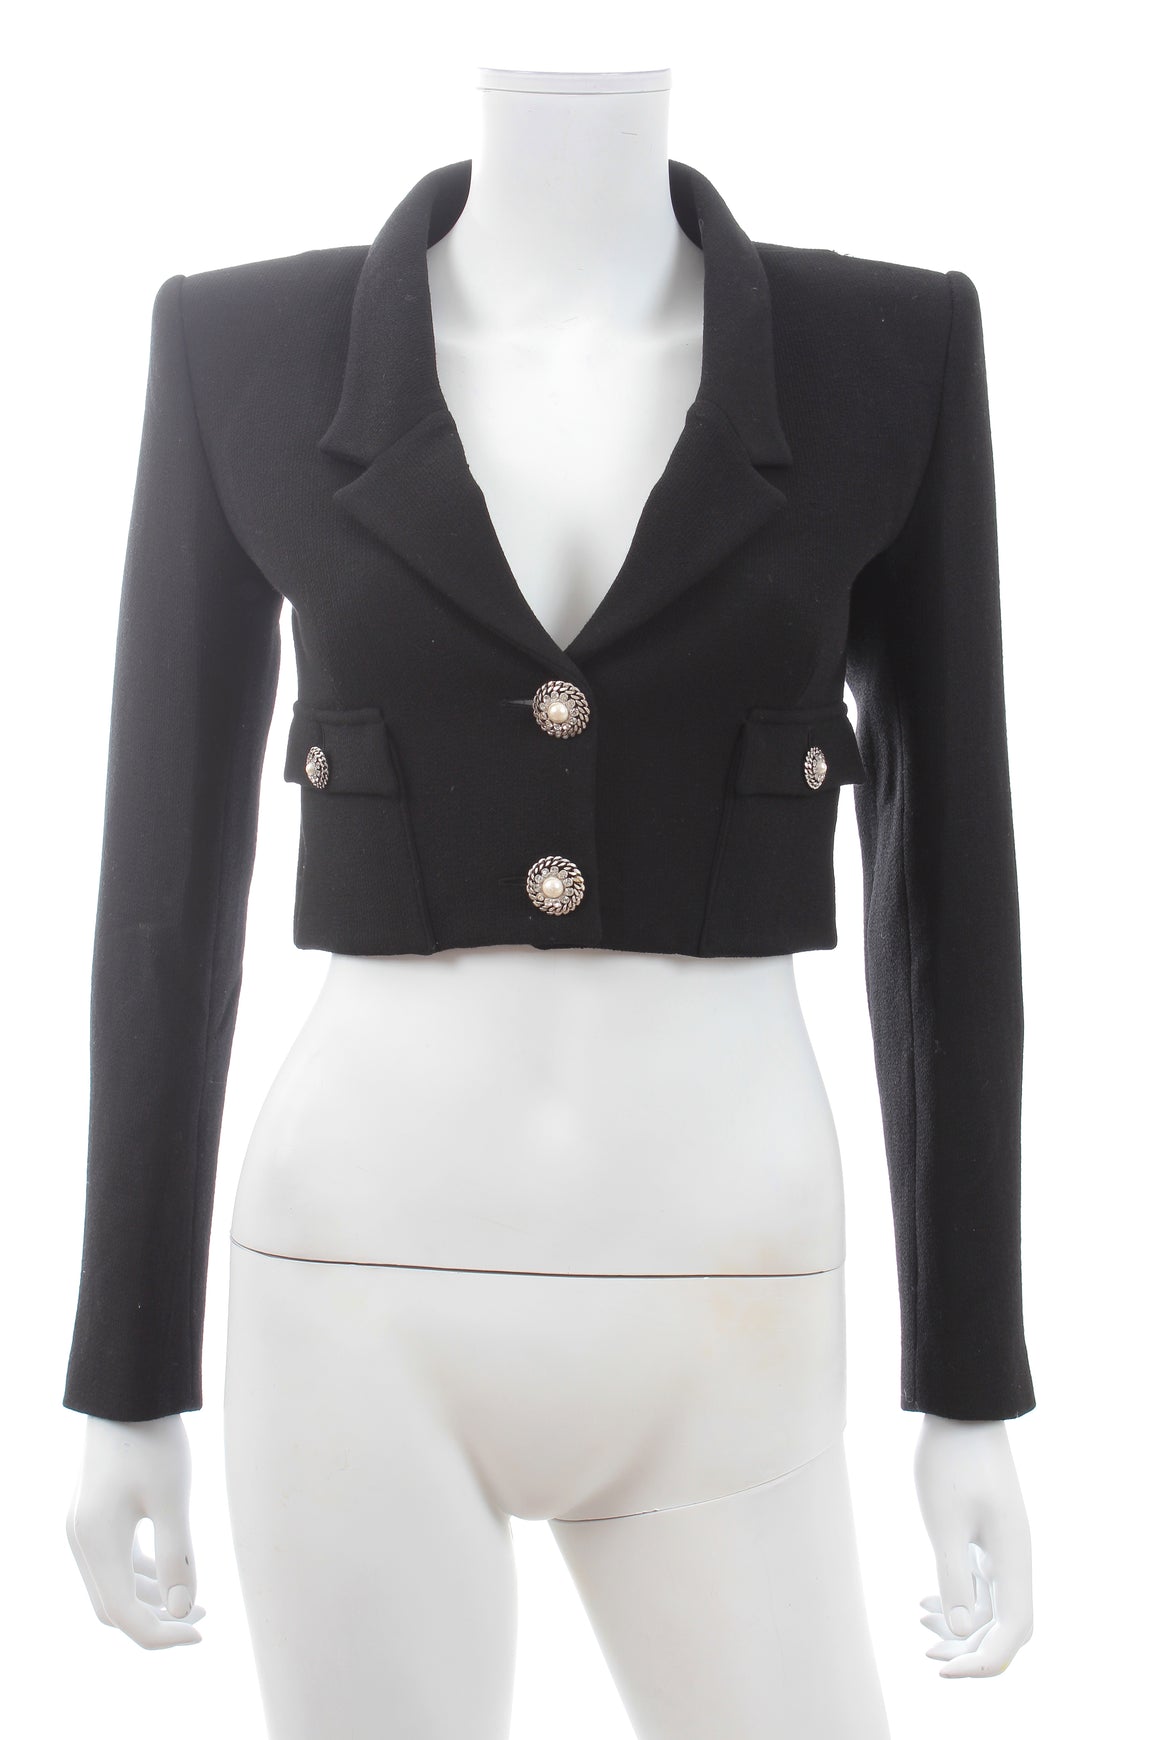 Alessandra Rich Wool-Crepe Cropped Jacket